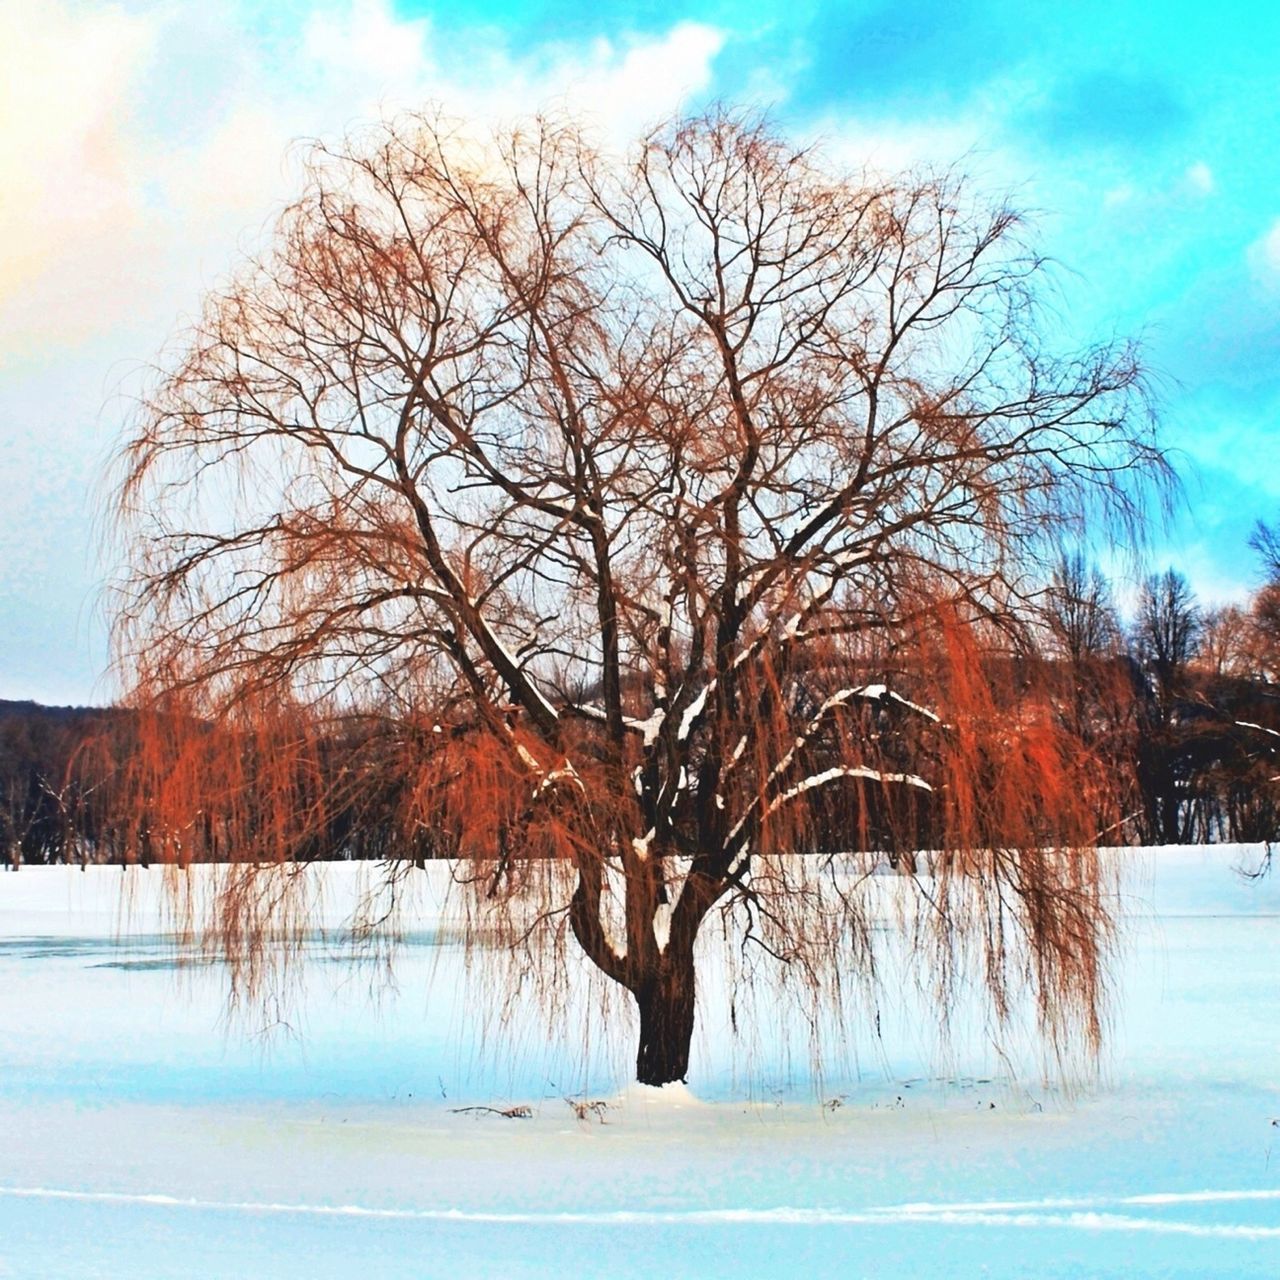 tree, bare tree, snow, winter, cold temperature, tranquility, tranquil scene, sky, season, beauty in nature, scenics, nature, branch, lake, landscape, weather, cloud - sky, water, tree trunk, field